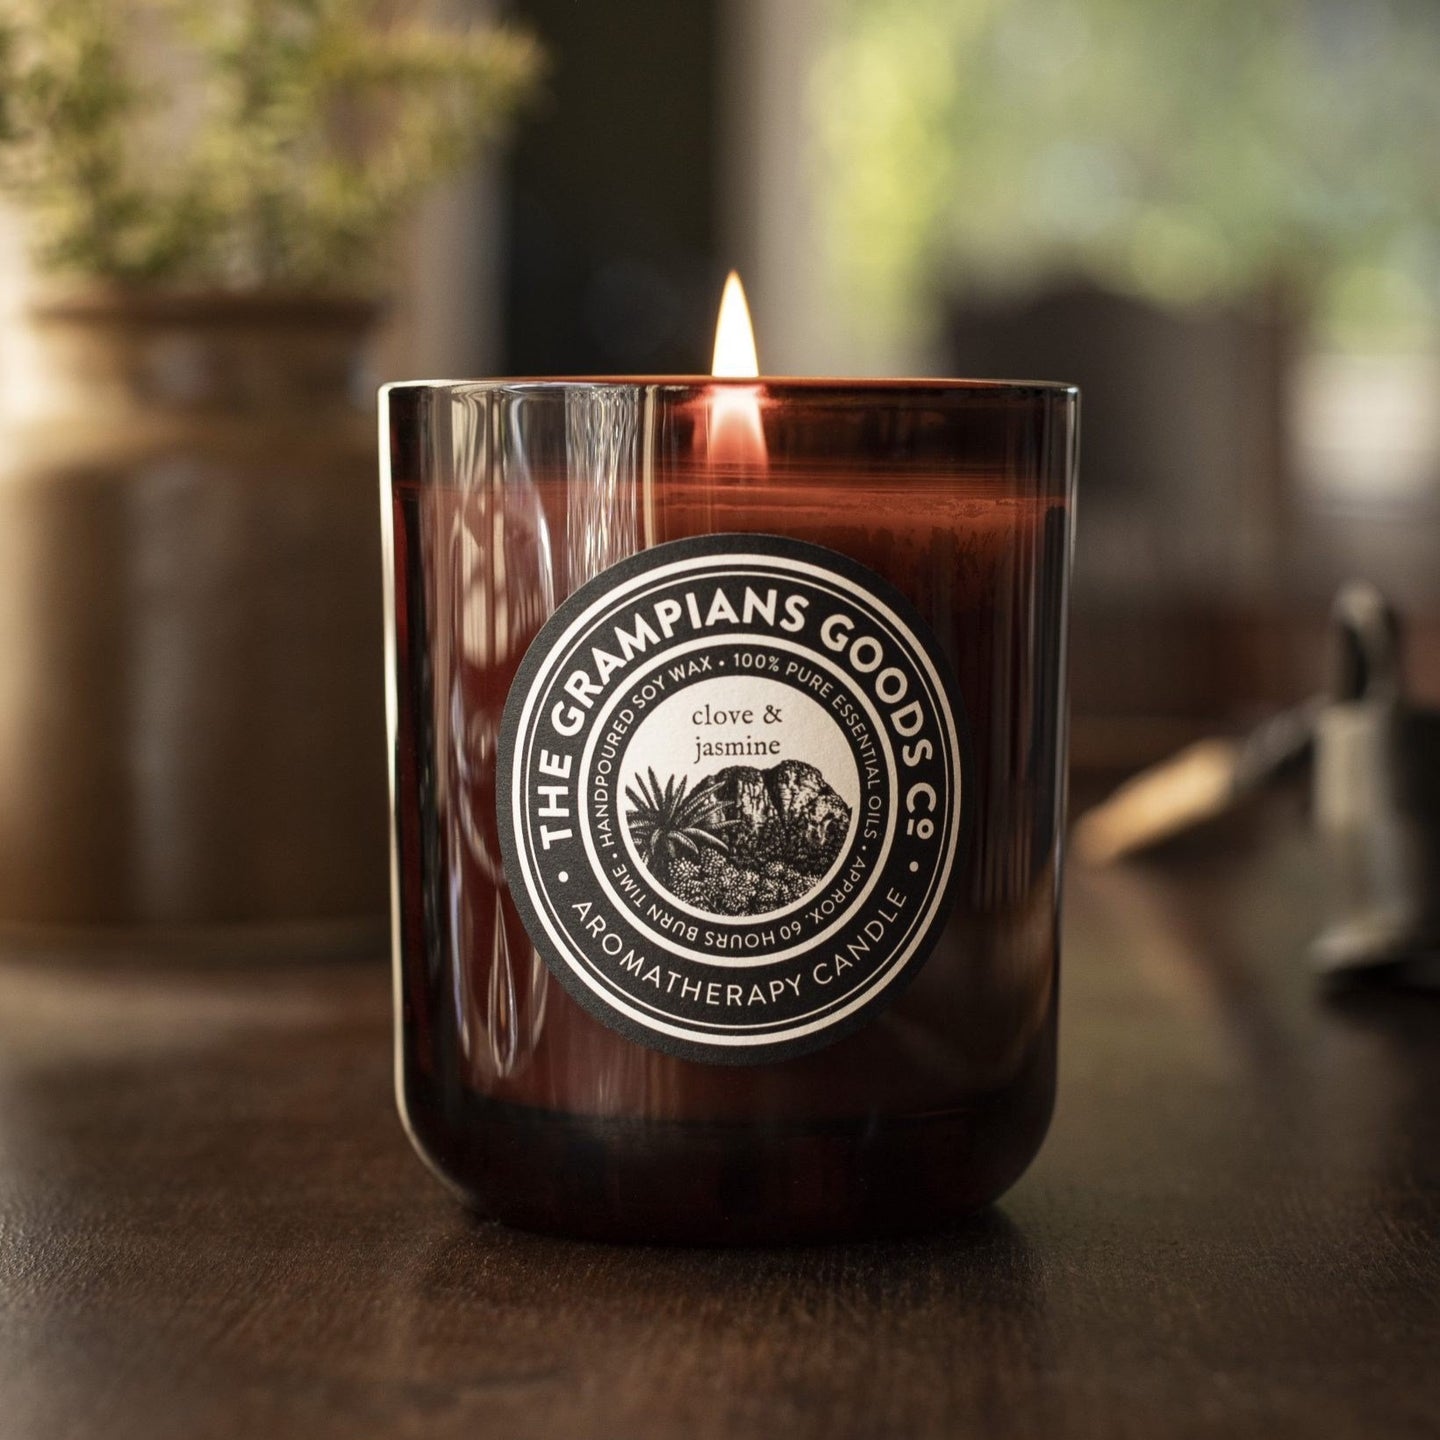 The Grampians Goods Co. Aromatherapy Candles